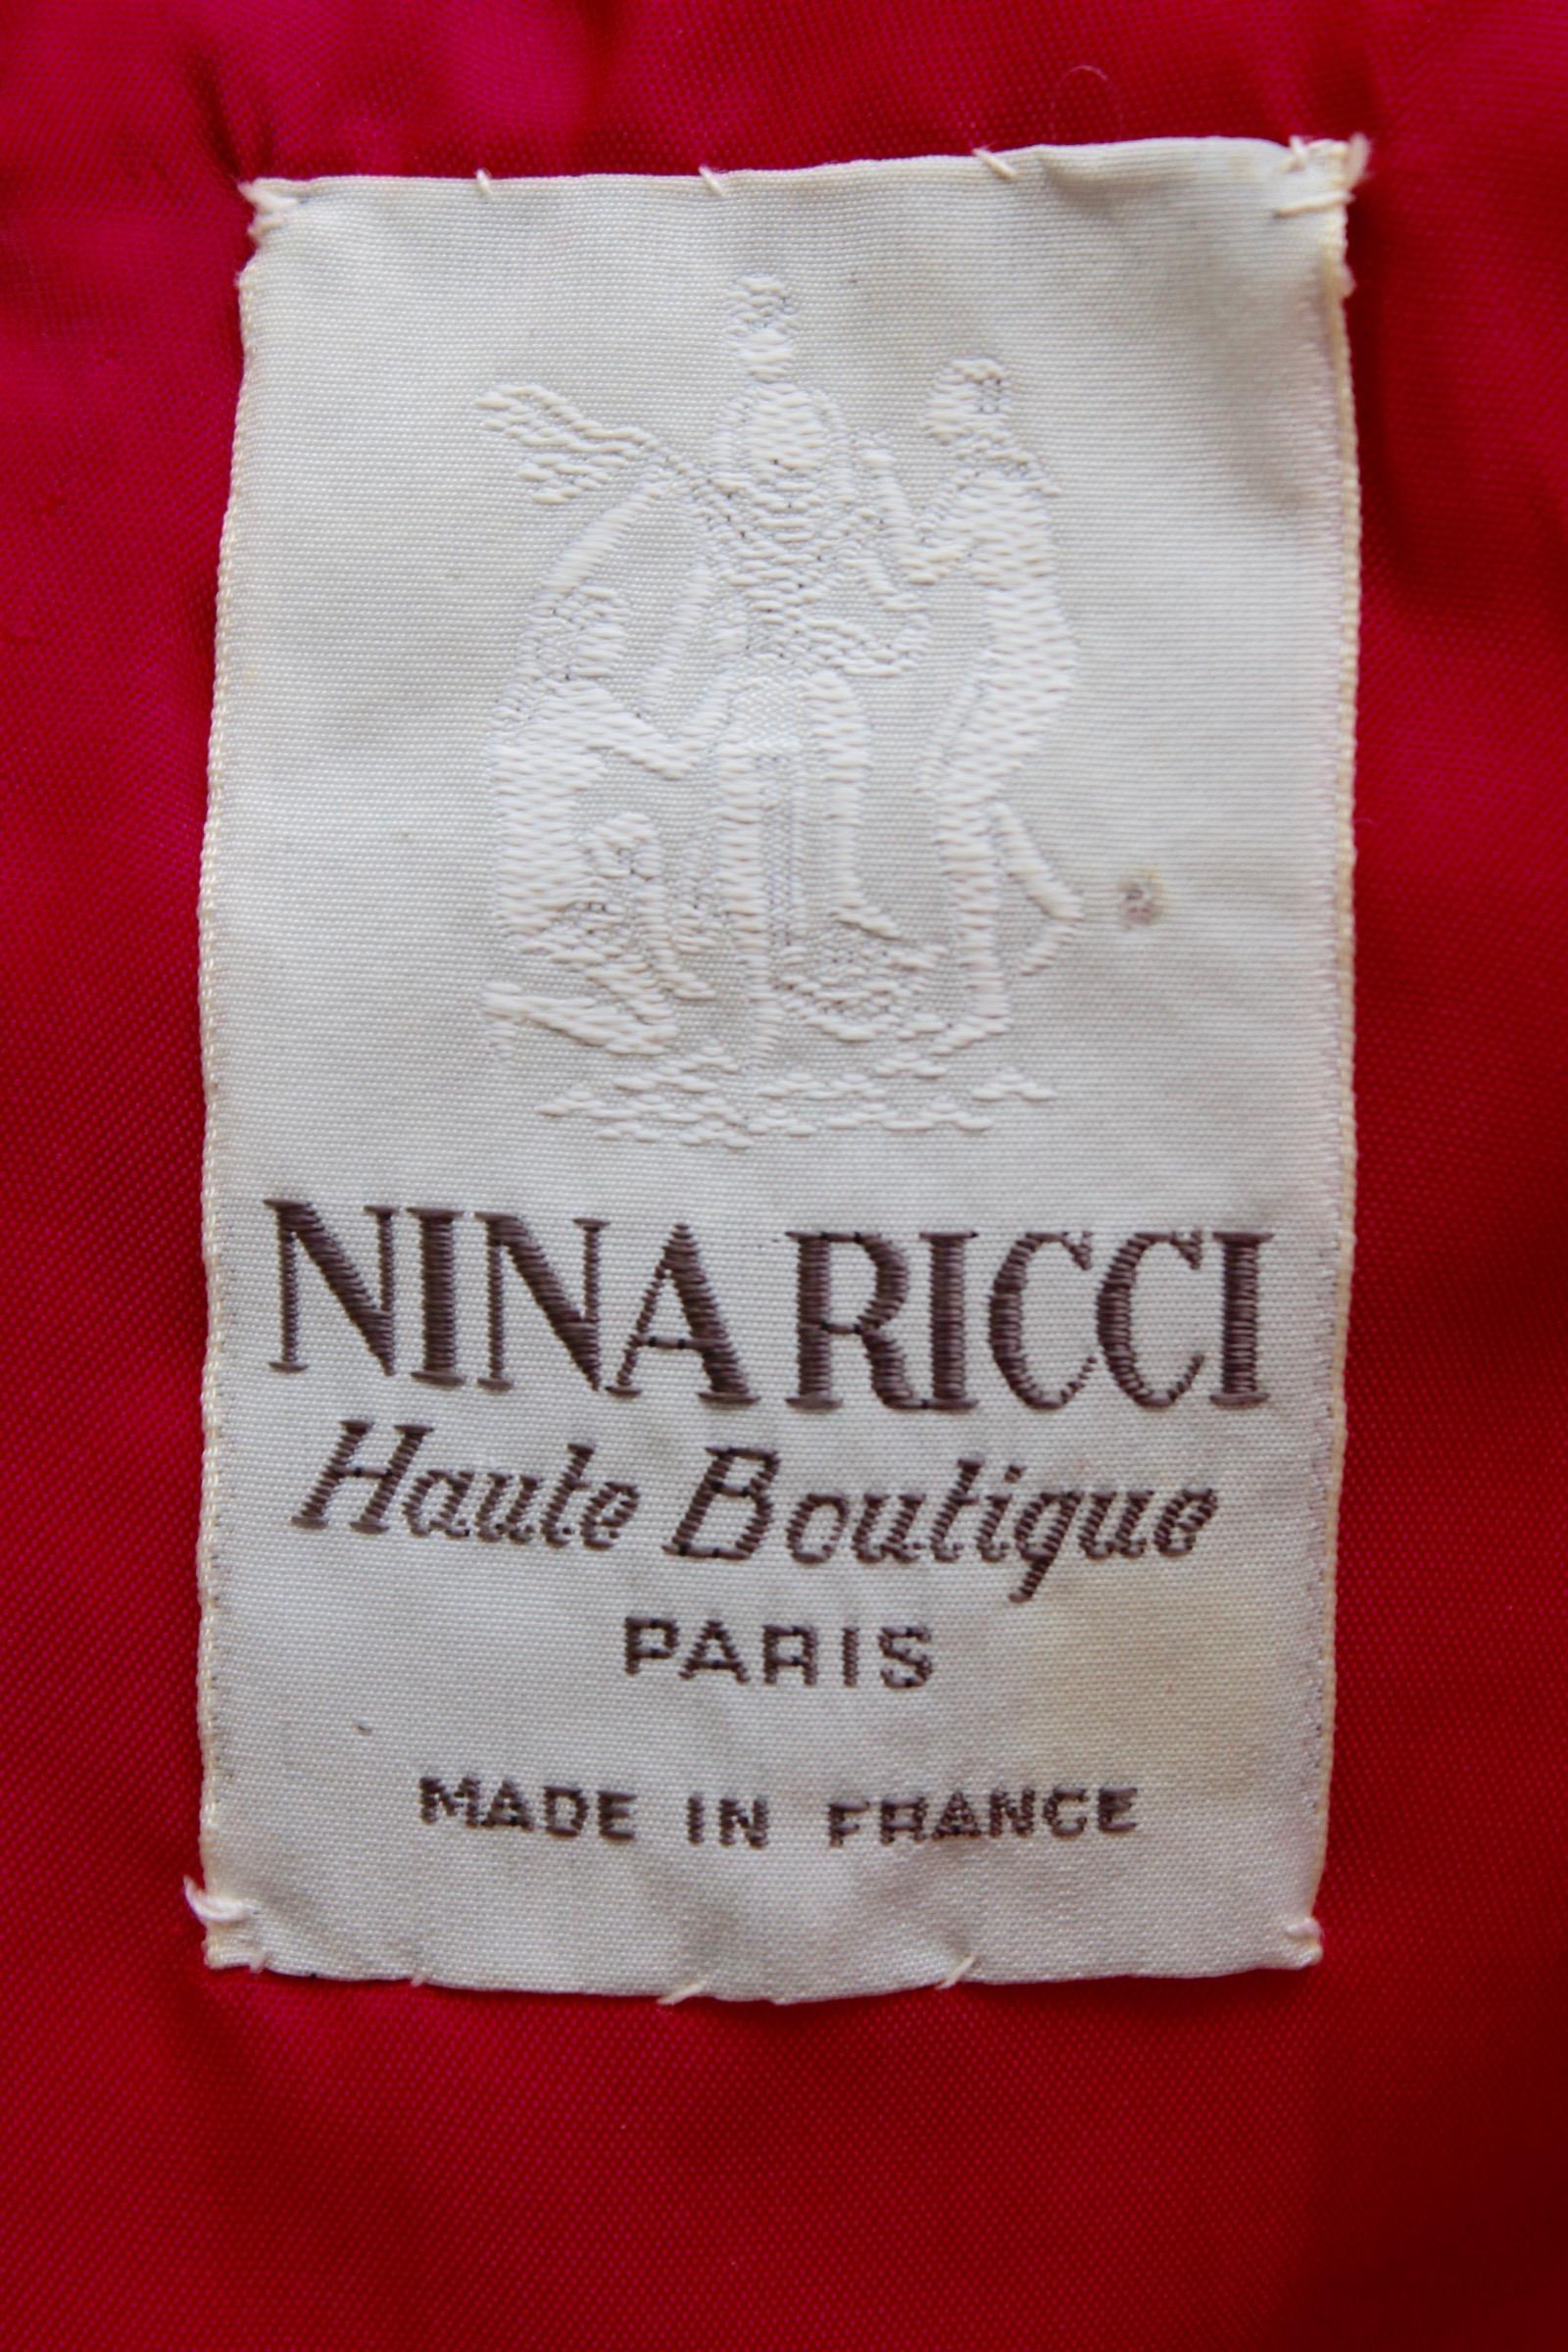 Nina Ricci lovely skater dress with floral pattern, large bow and star For Sale 6